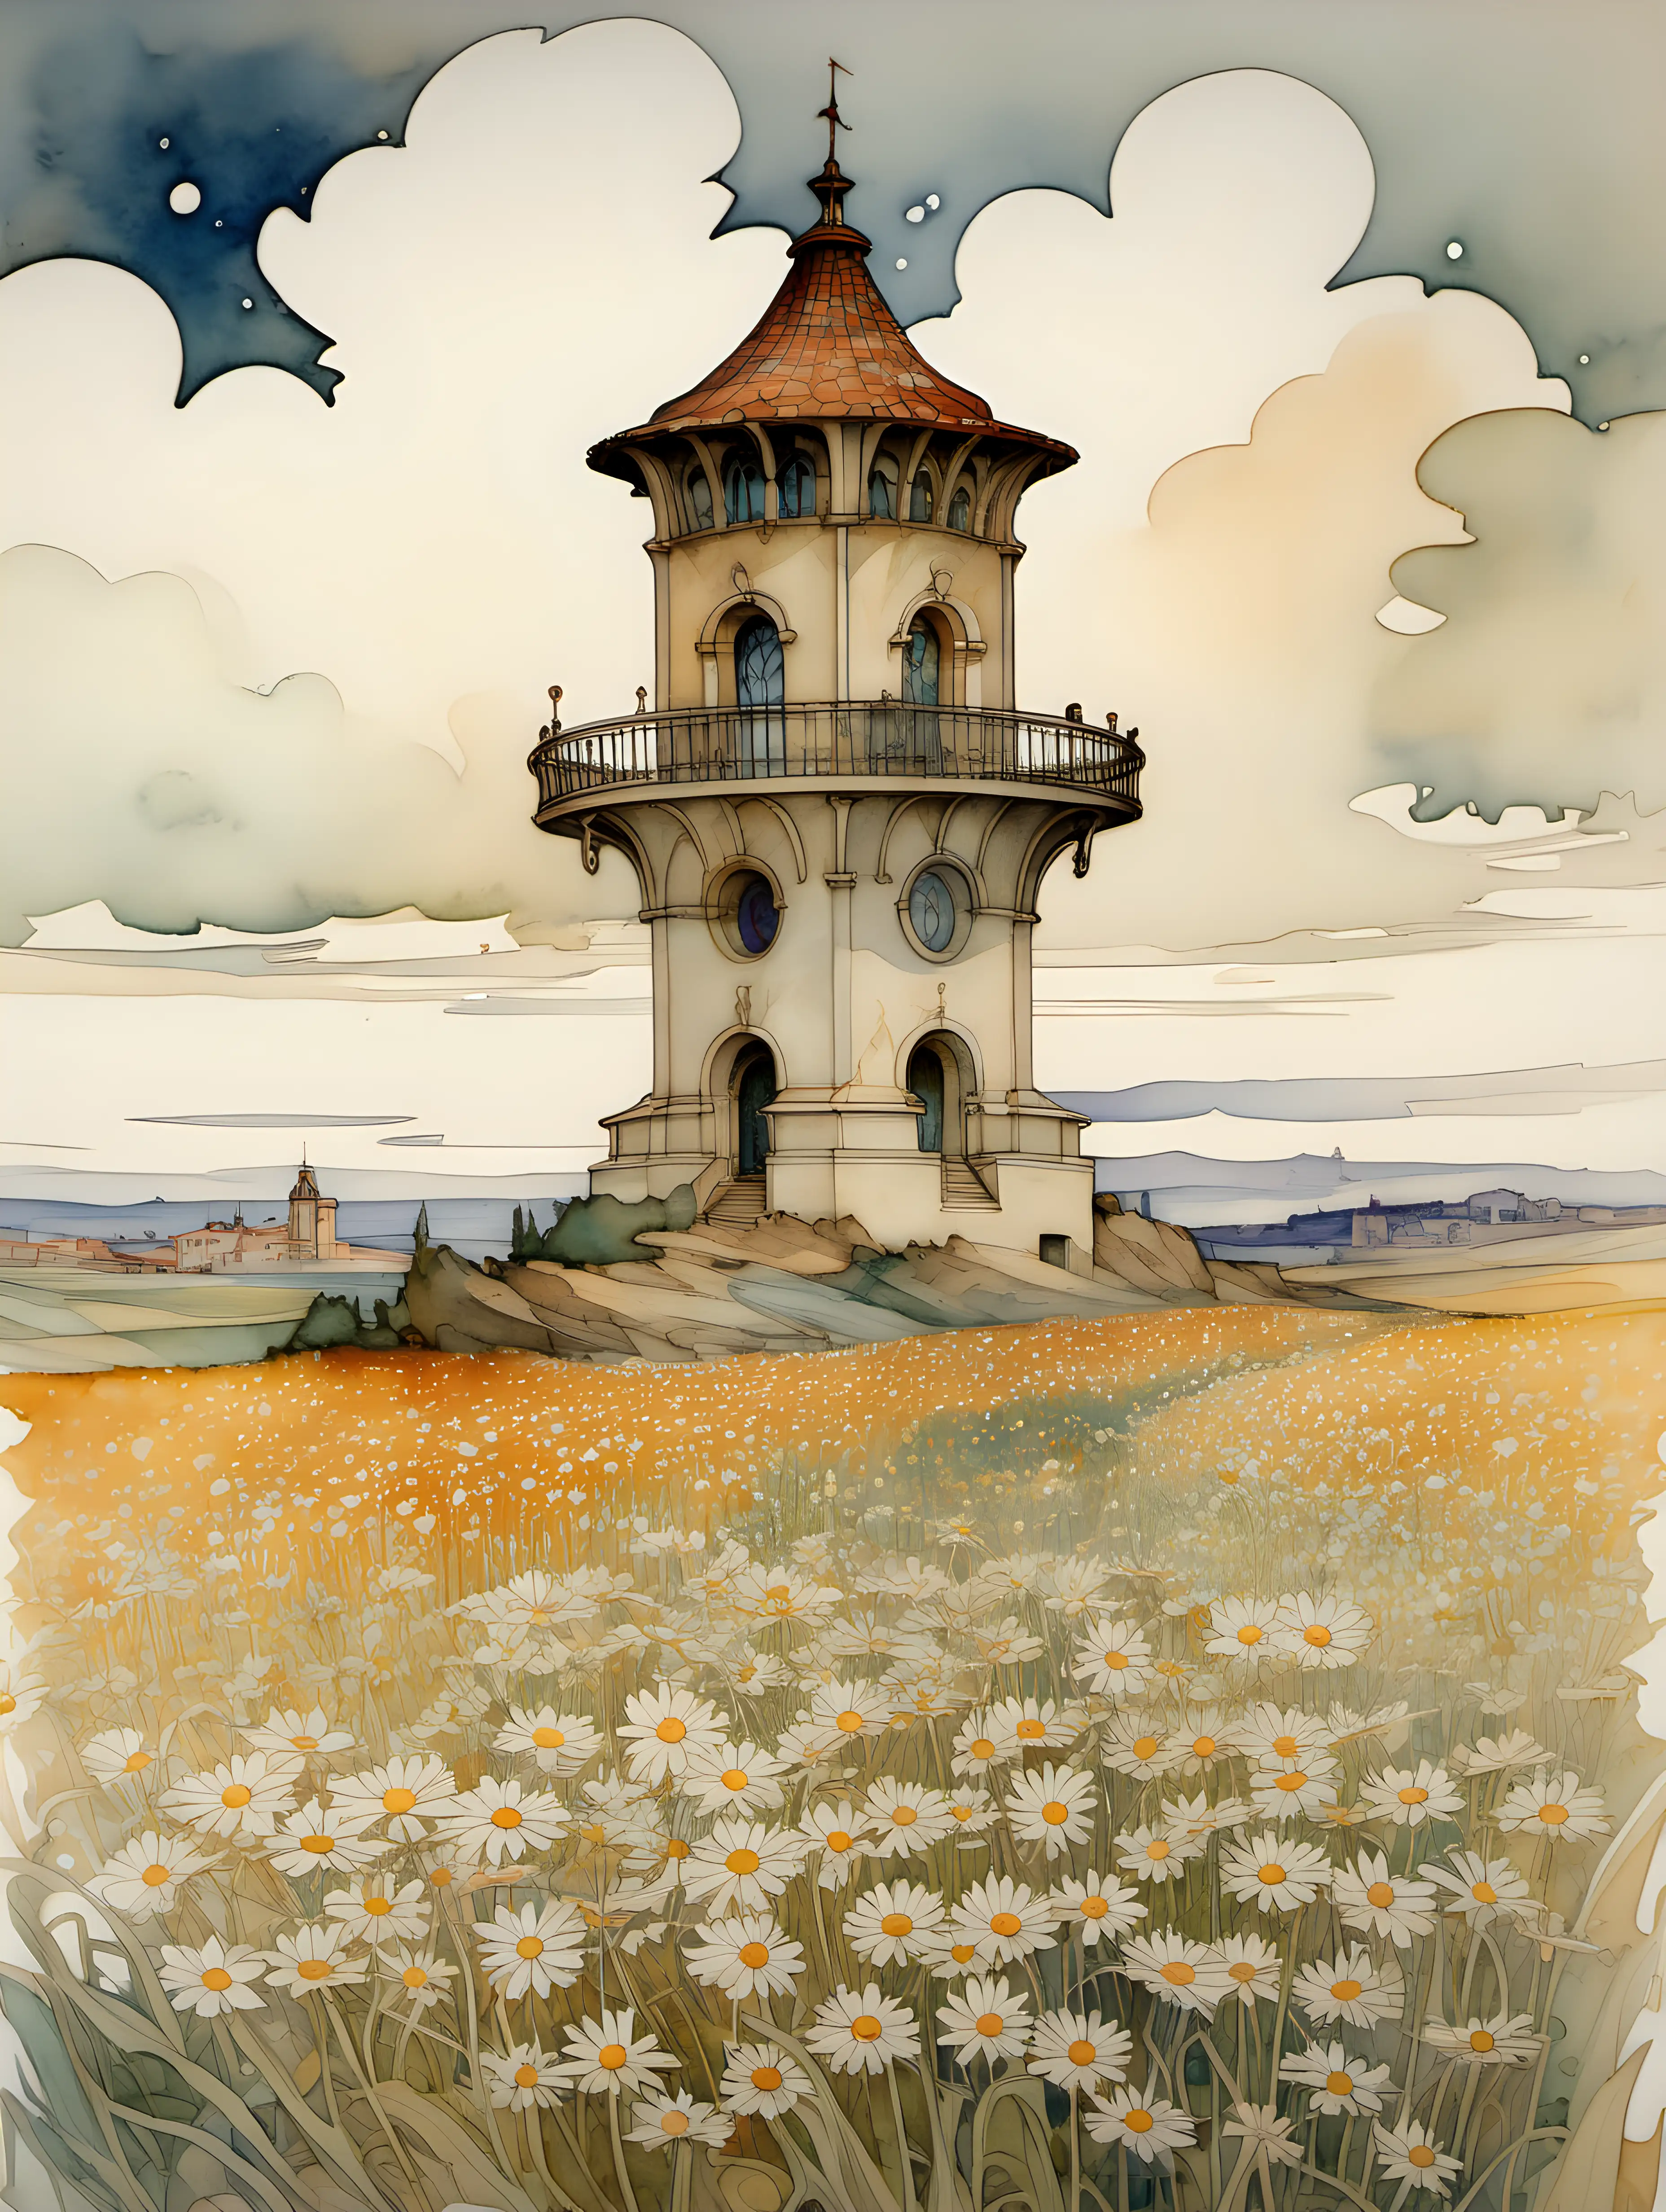 impresionistic daisy field watercolor Alphonse Mucha style colors muted horizon with a watchtower catalan style 16th century catalan medieval artifacts